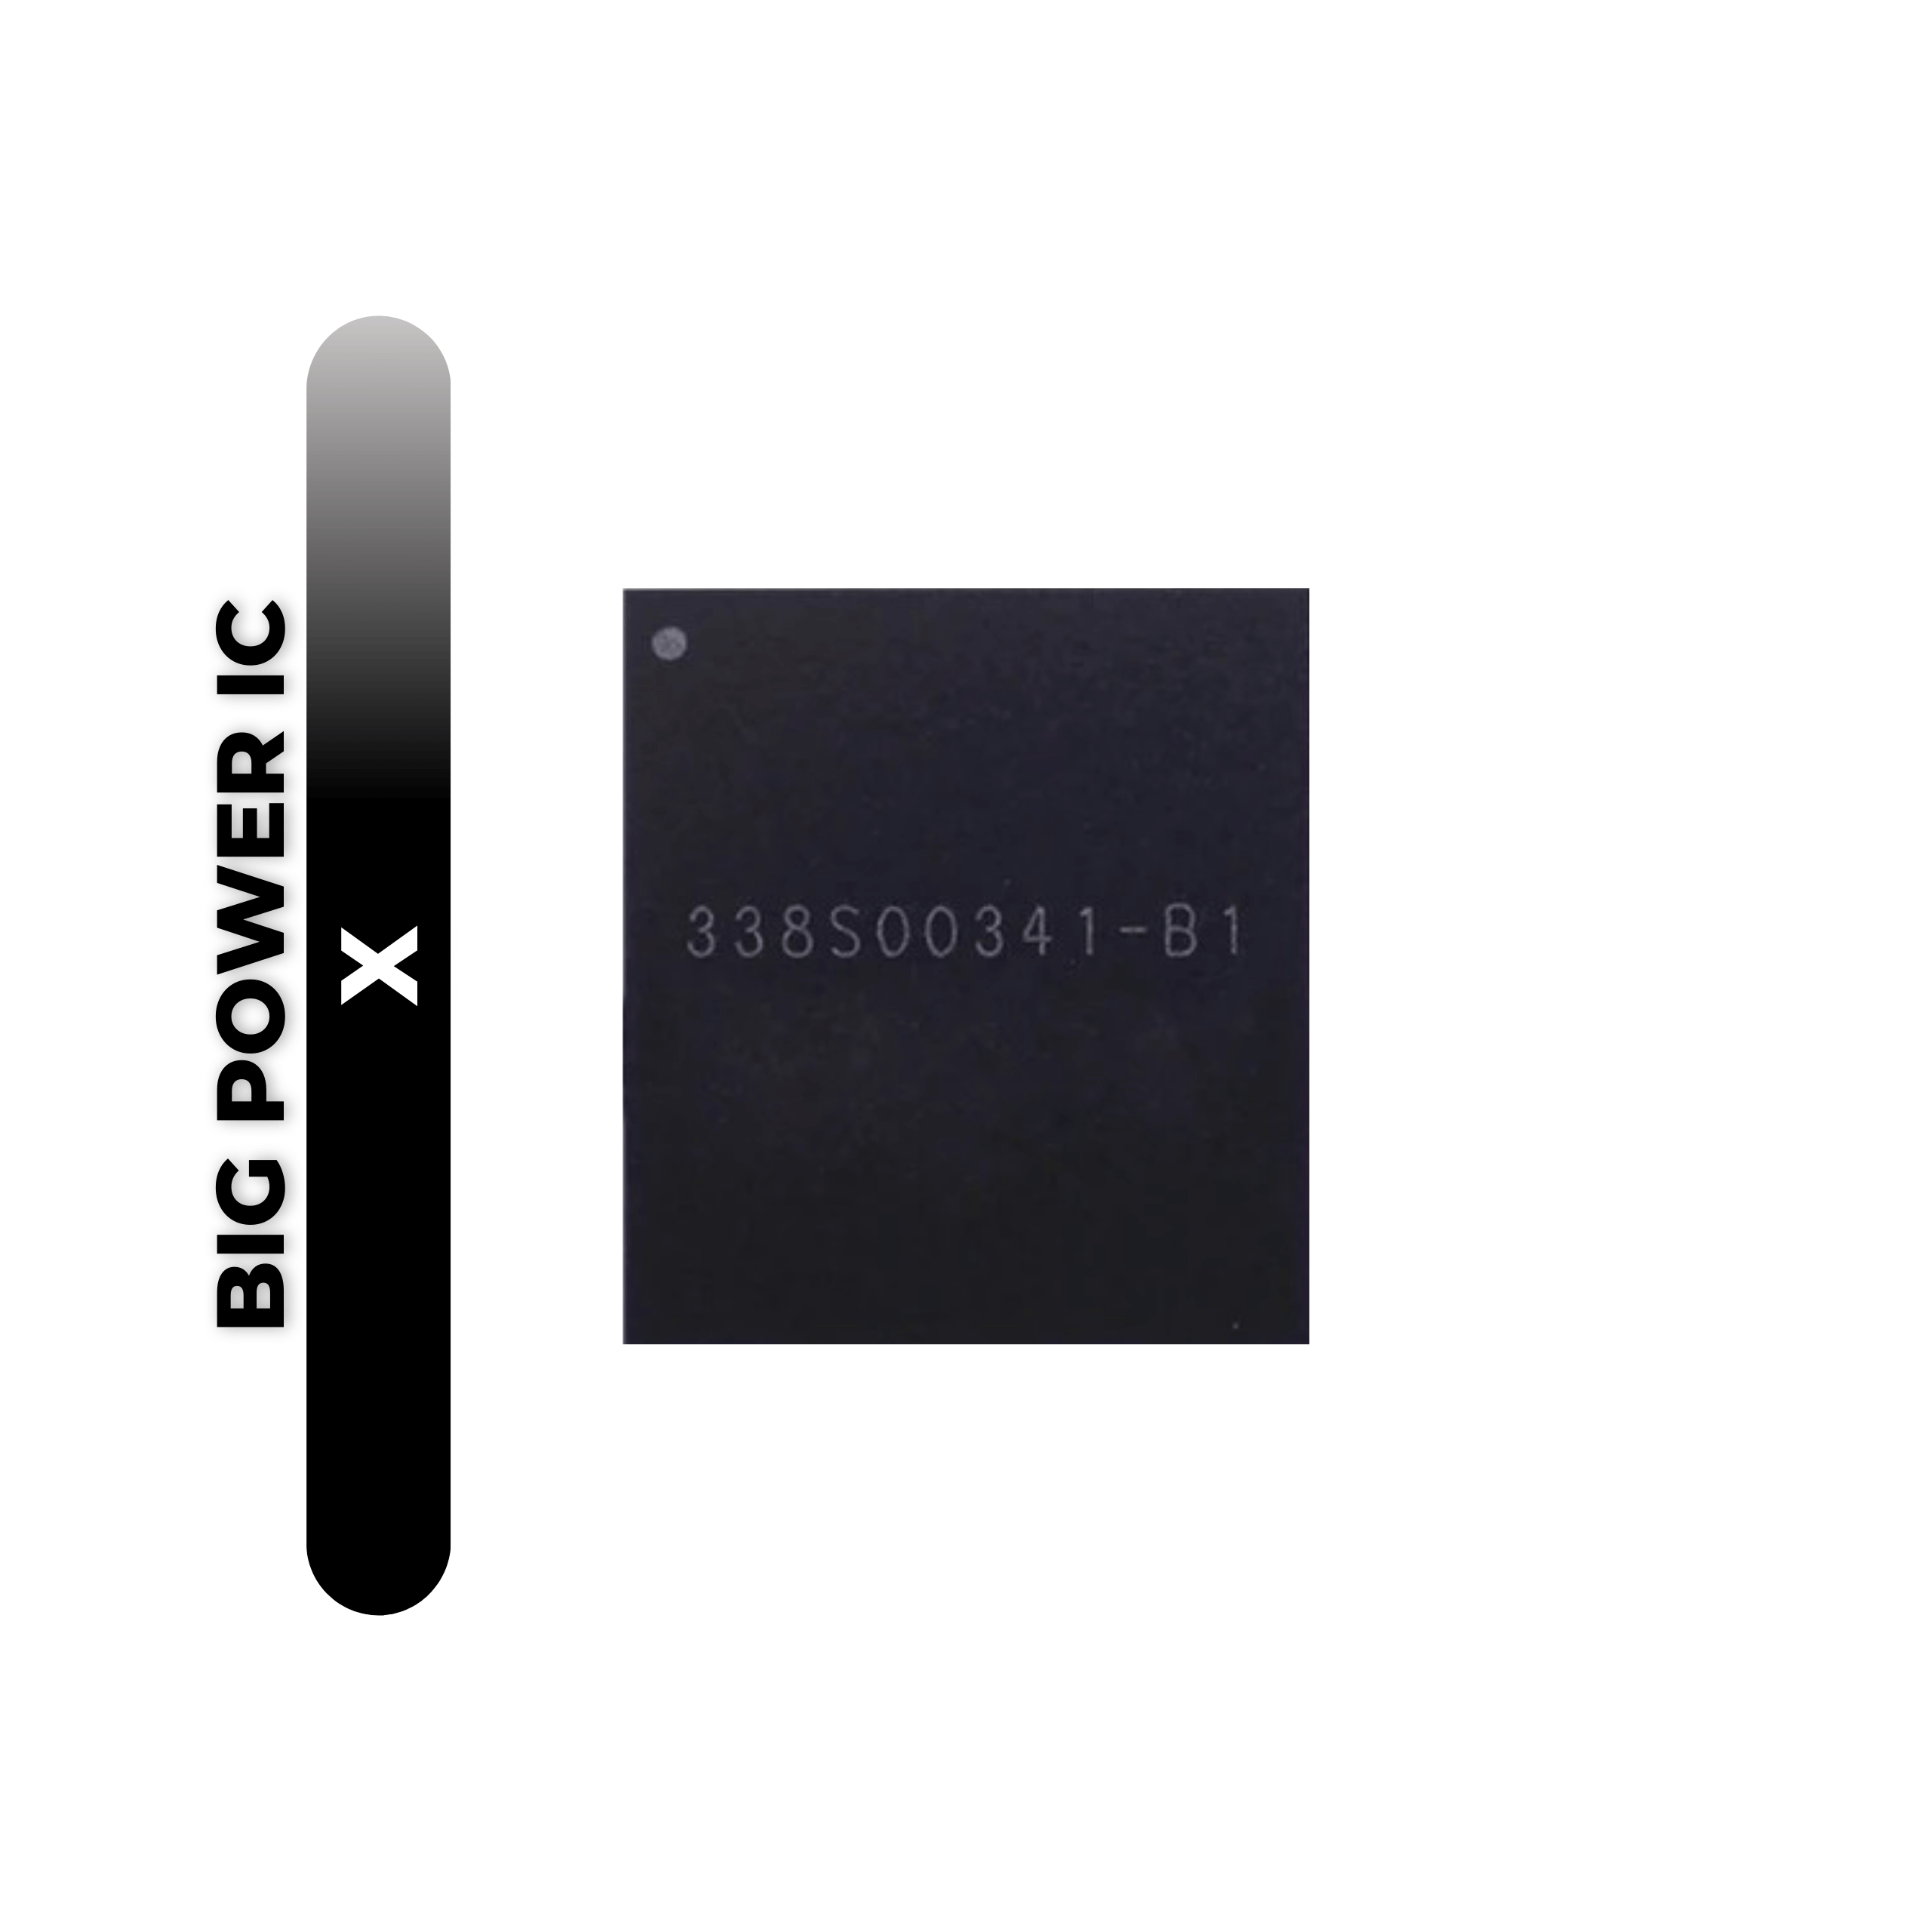 Big Power Management IC for iPhone X (U2700) (338S00341)